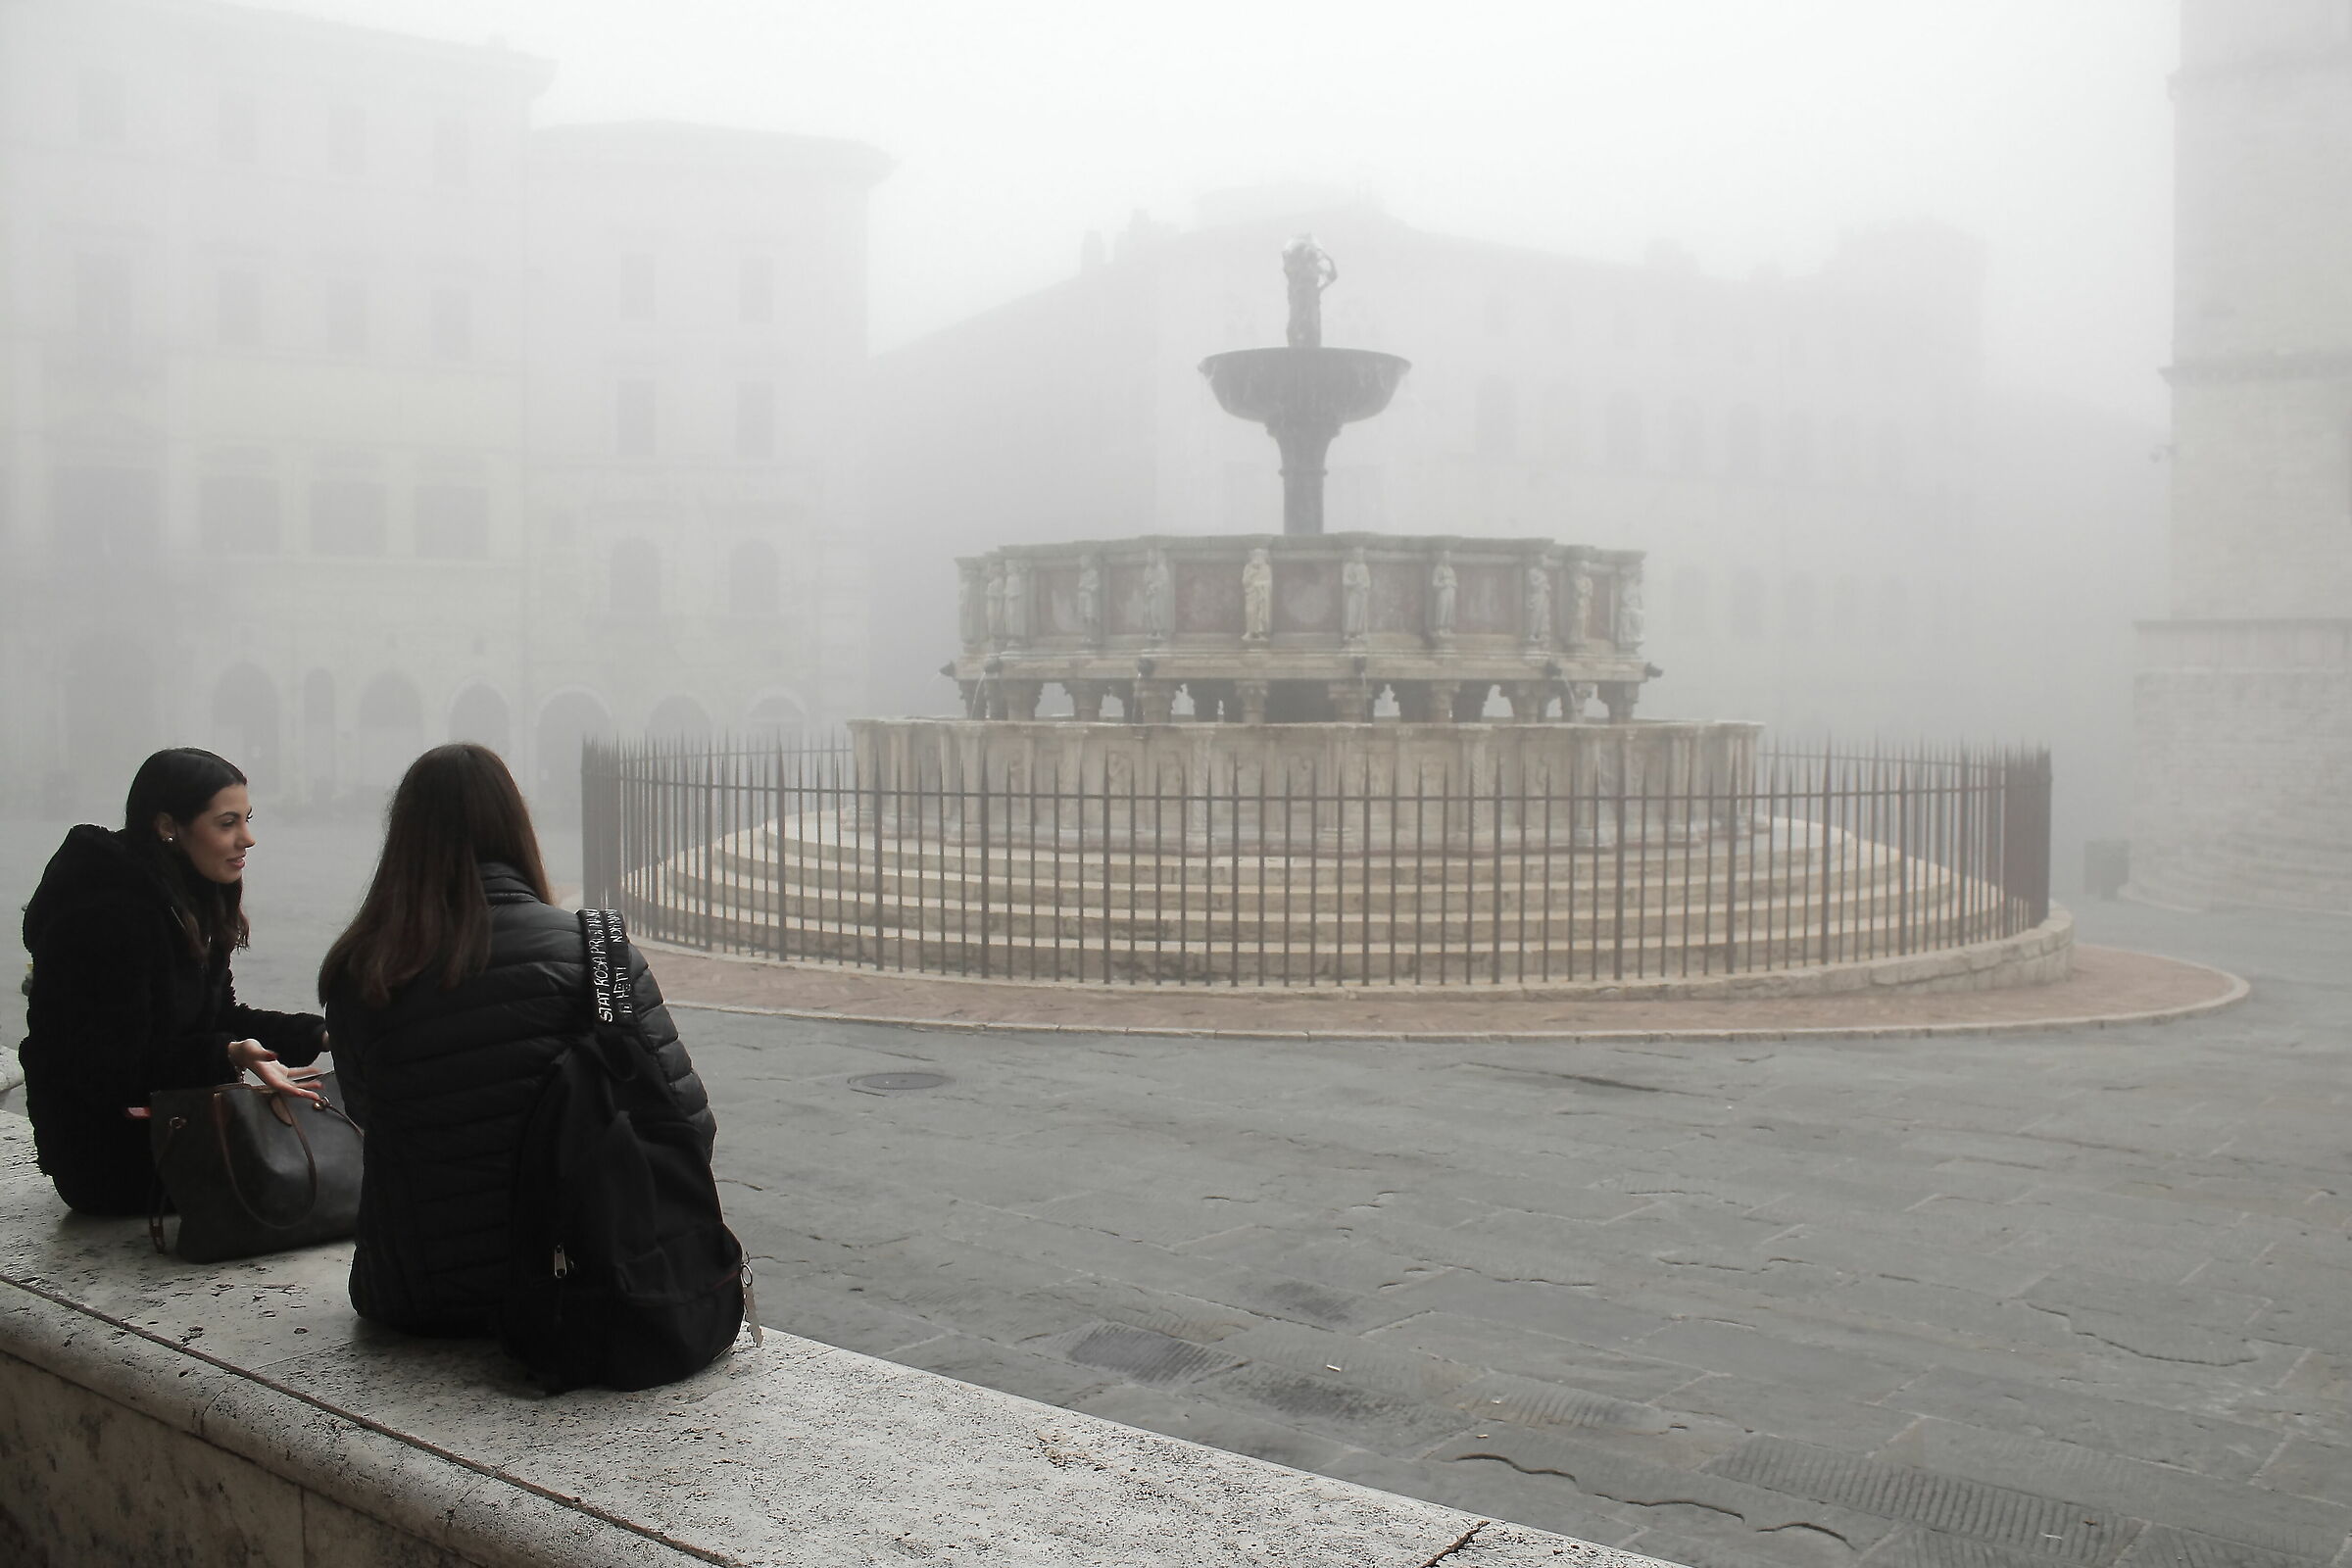 4 chats, 2 friends, 1 fountain... and the fog...